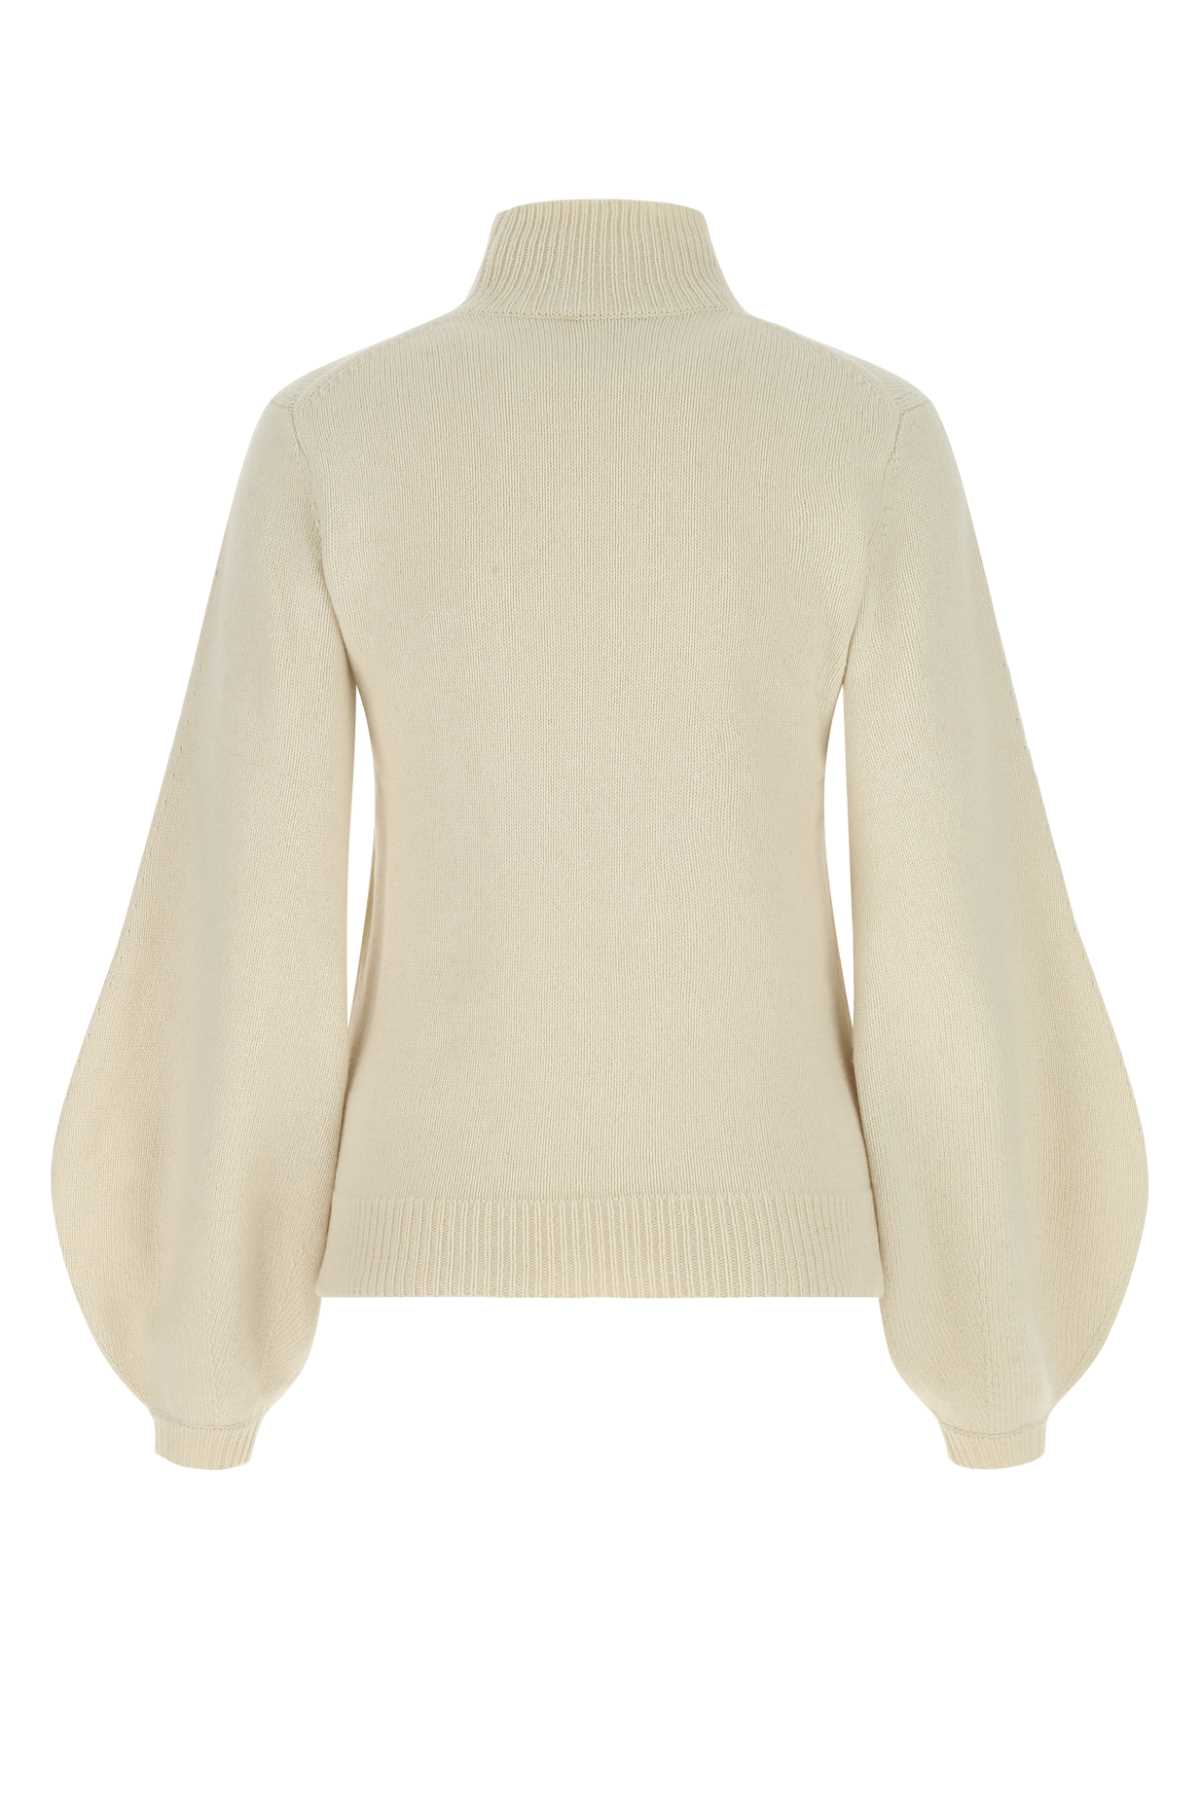 Chloé Sand Cashmere Sweater In 109